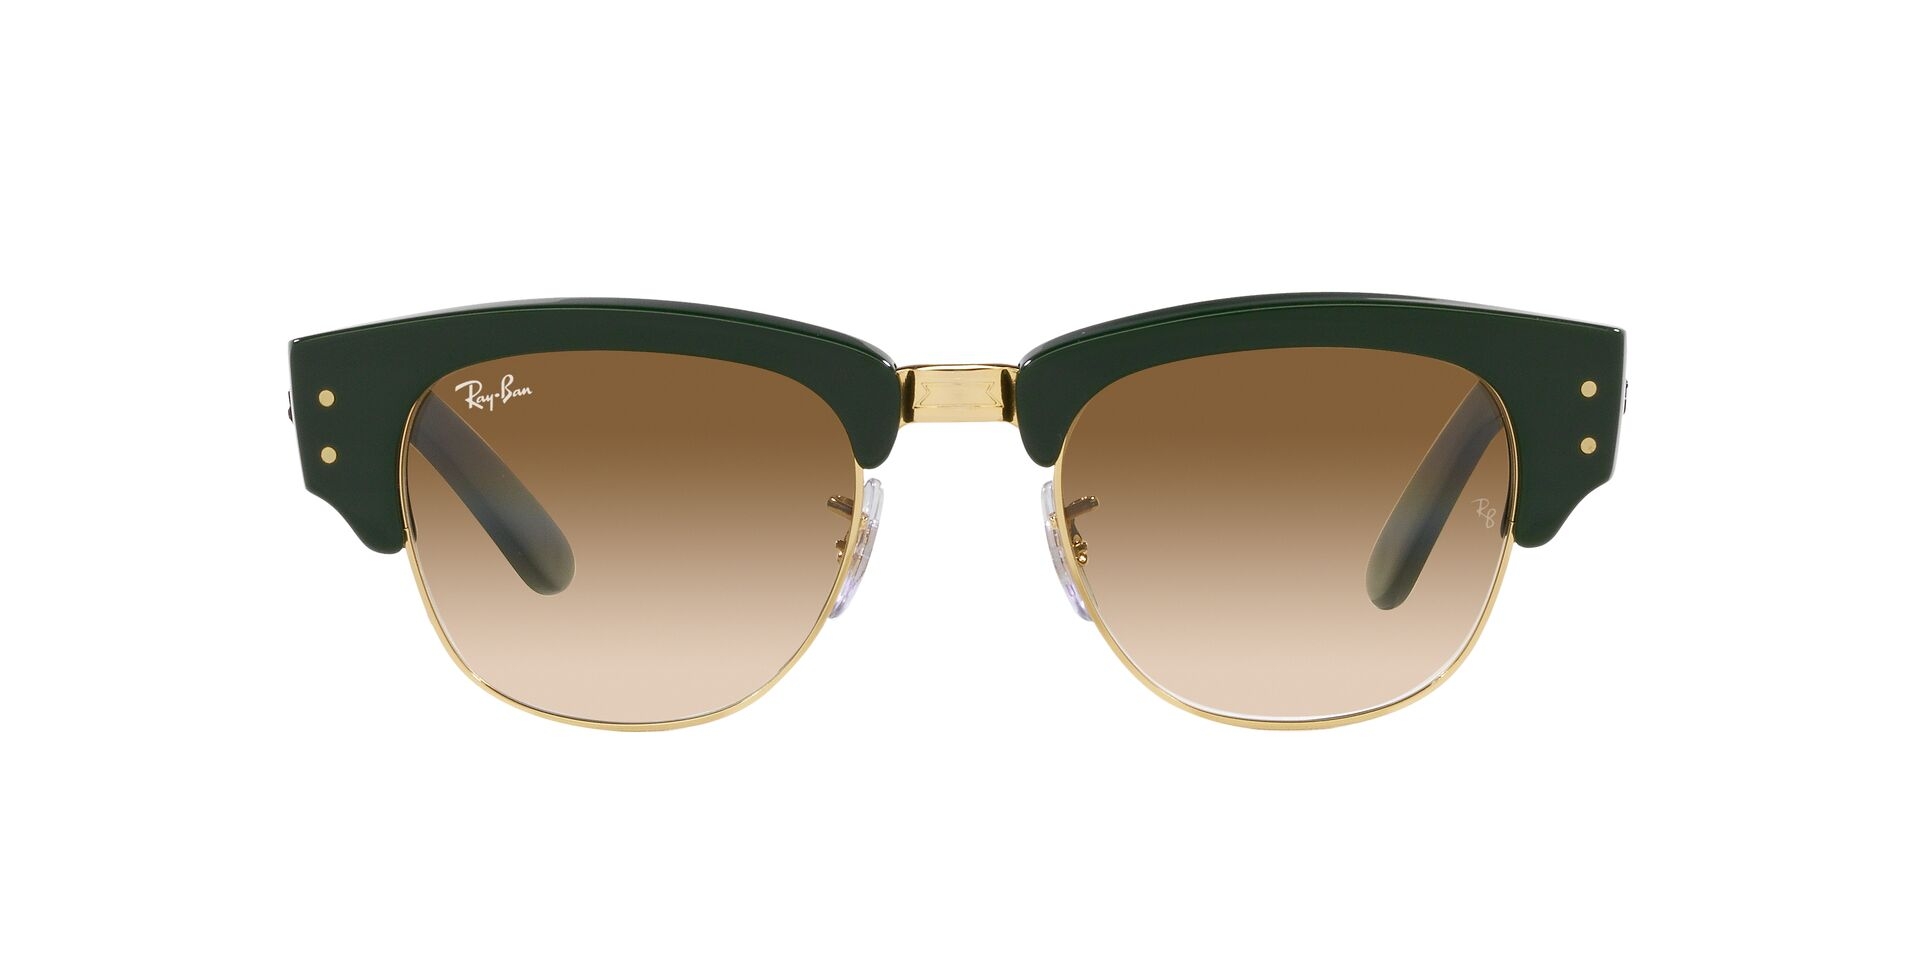 Buy Ray-Ban Ray-Ban Sunglasses | Transparent Blu Sunglasses ( 0Rb0840S |  Square | Blue Frame | Brown Lens ) Sunglasses Online.